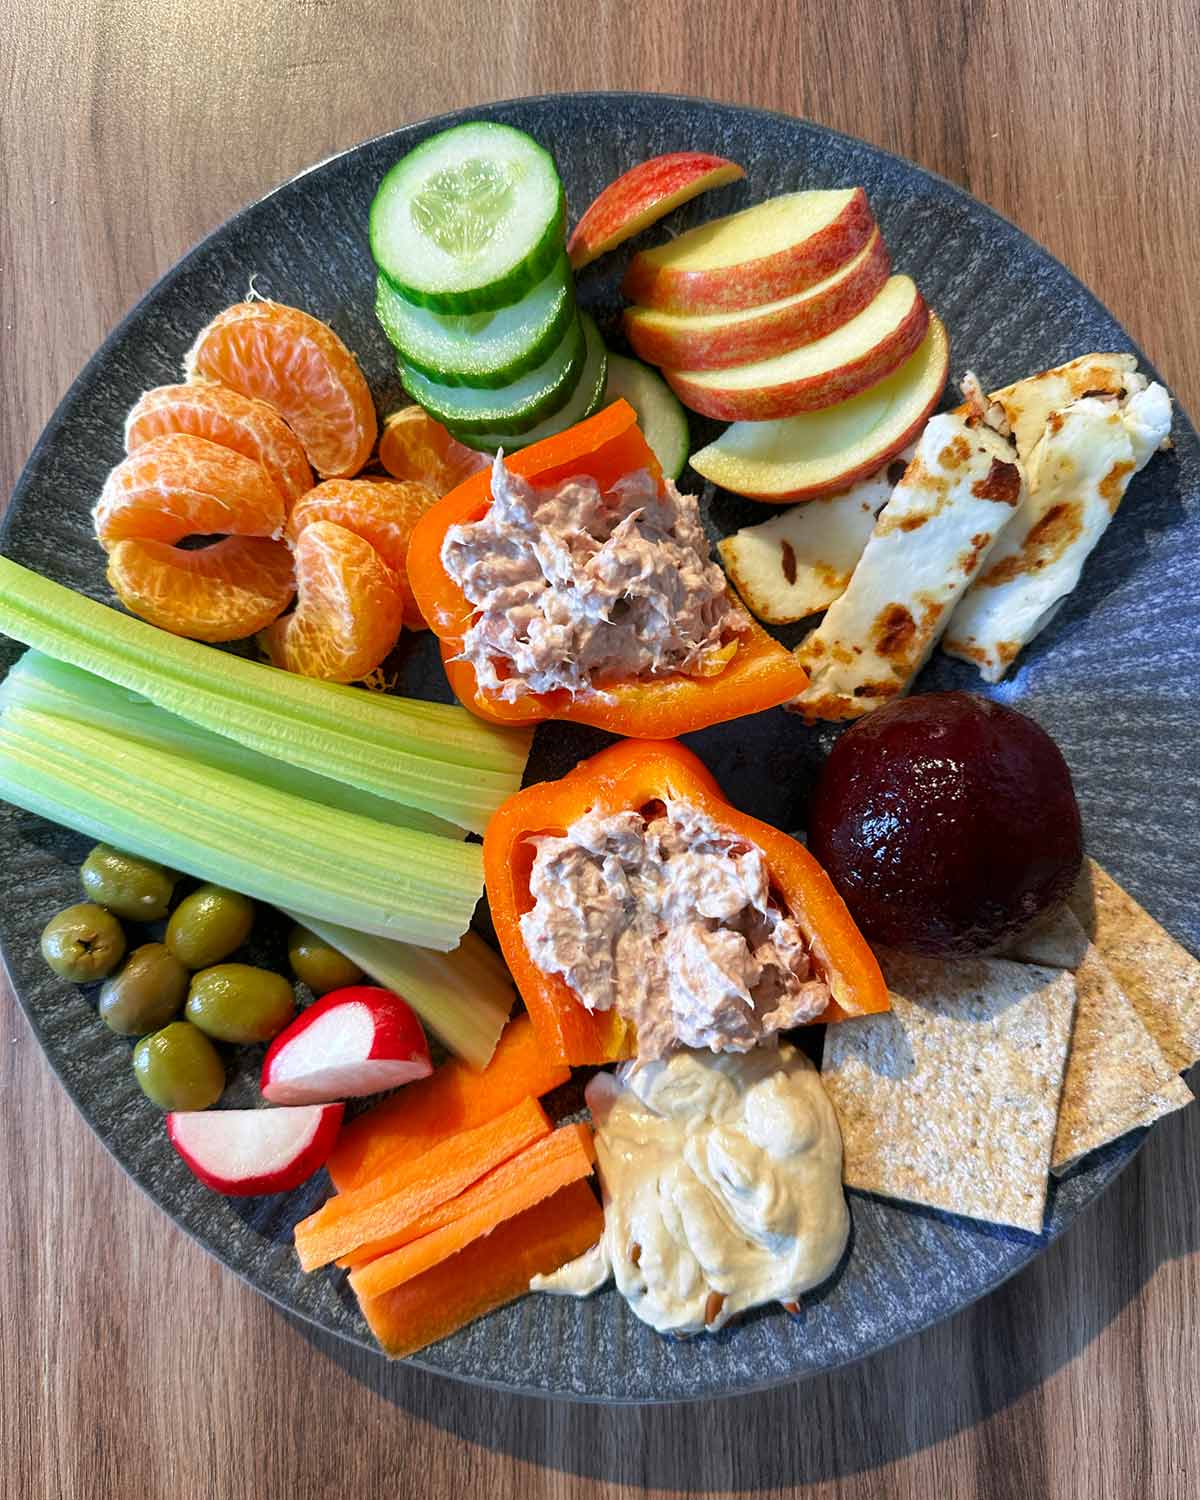 A plate of tuna stuffed peppers, celery, halloumi, crackers, humus, beetroot, olives and orange segments.